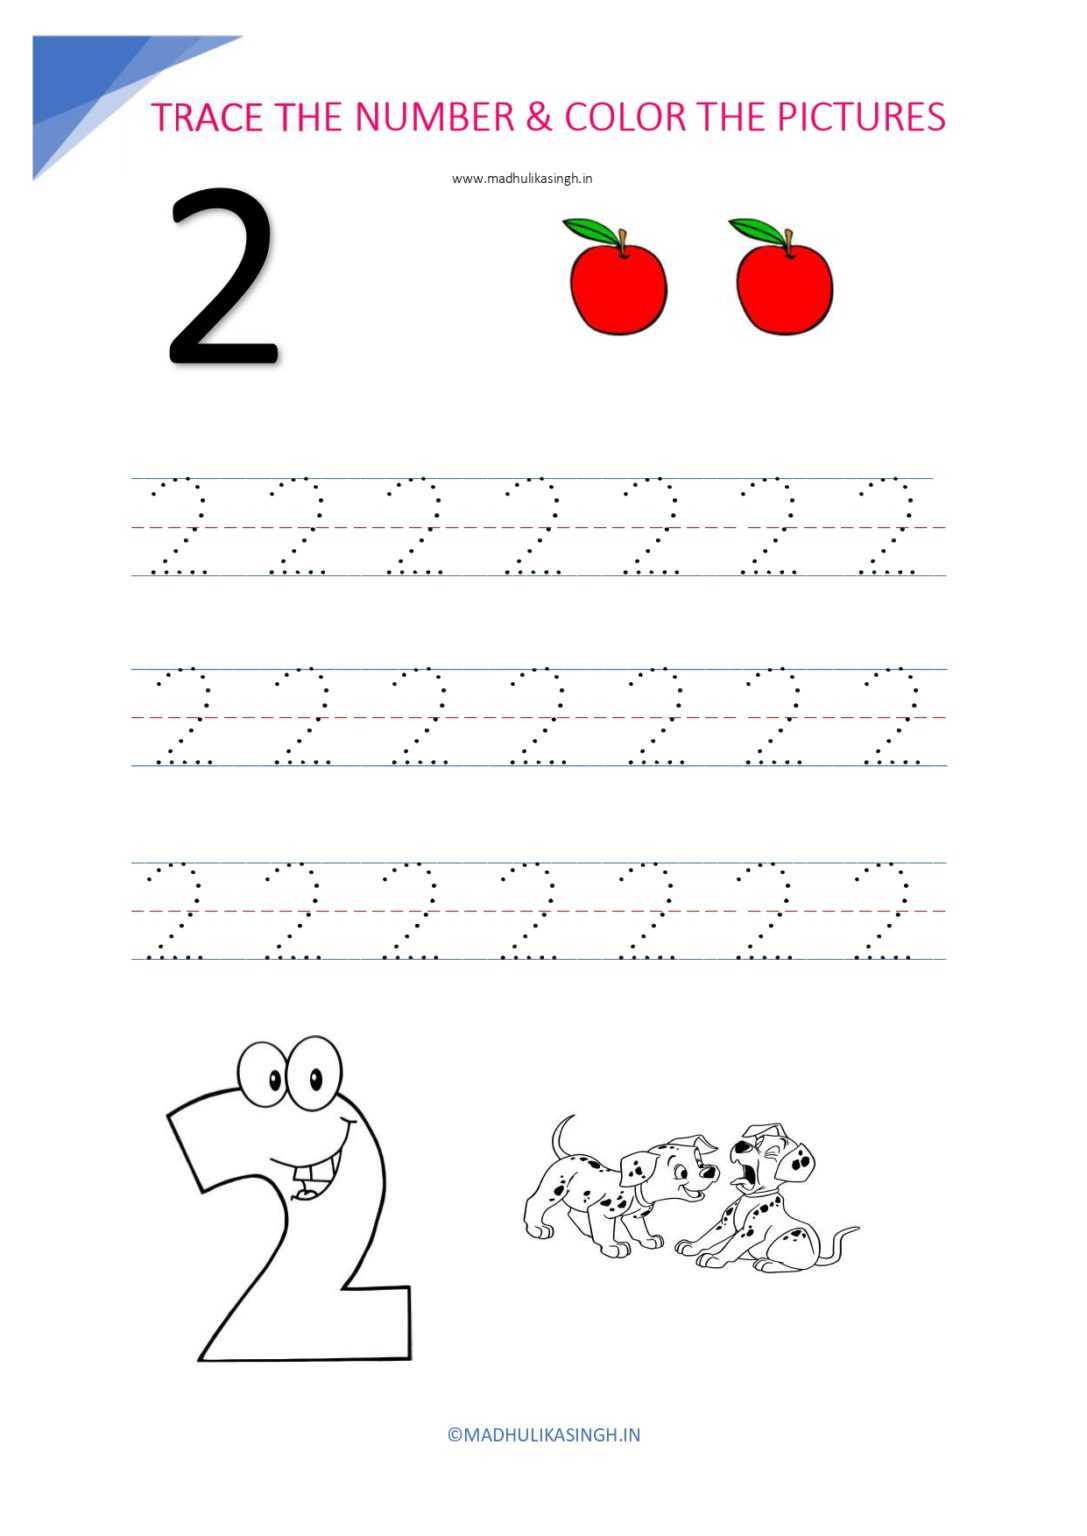 toys-games-tracing-numbers-1-10-learning-school-toys-etna-pe